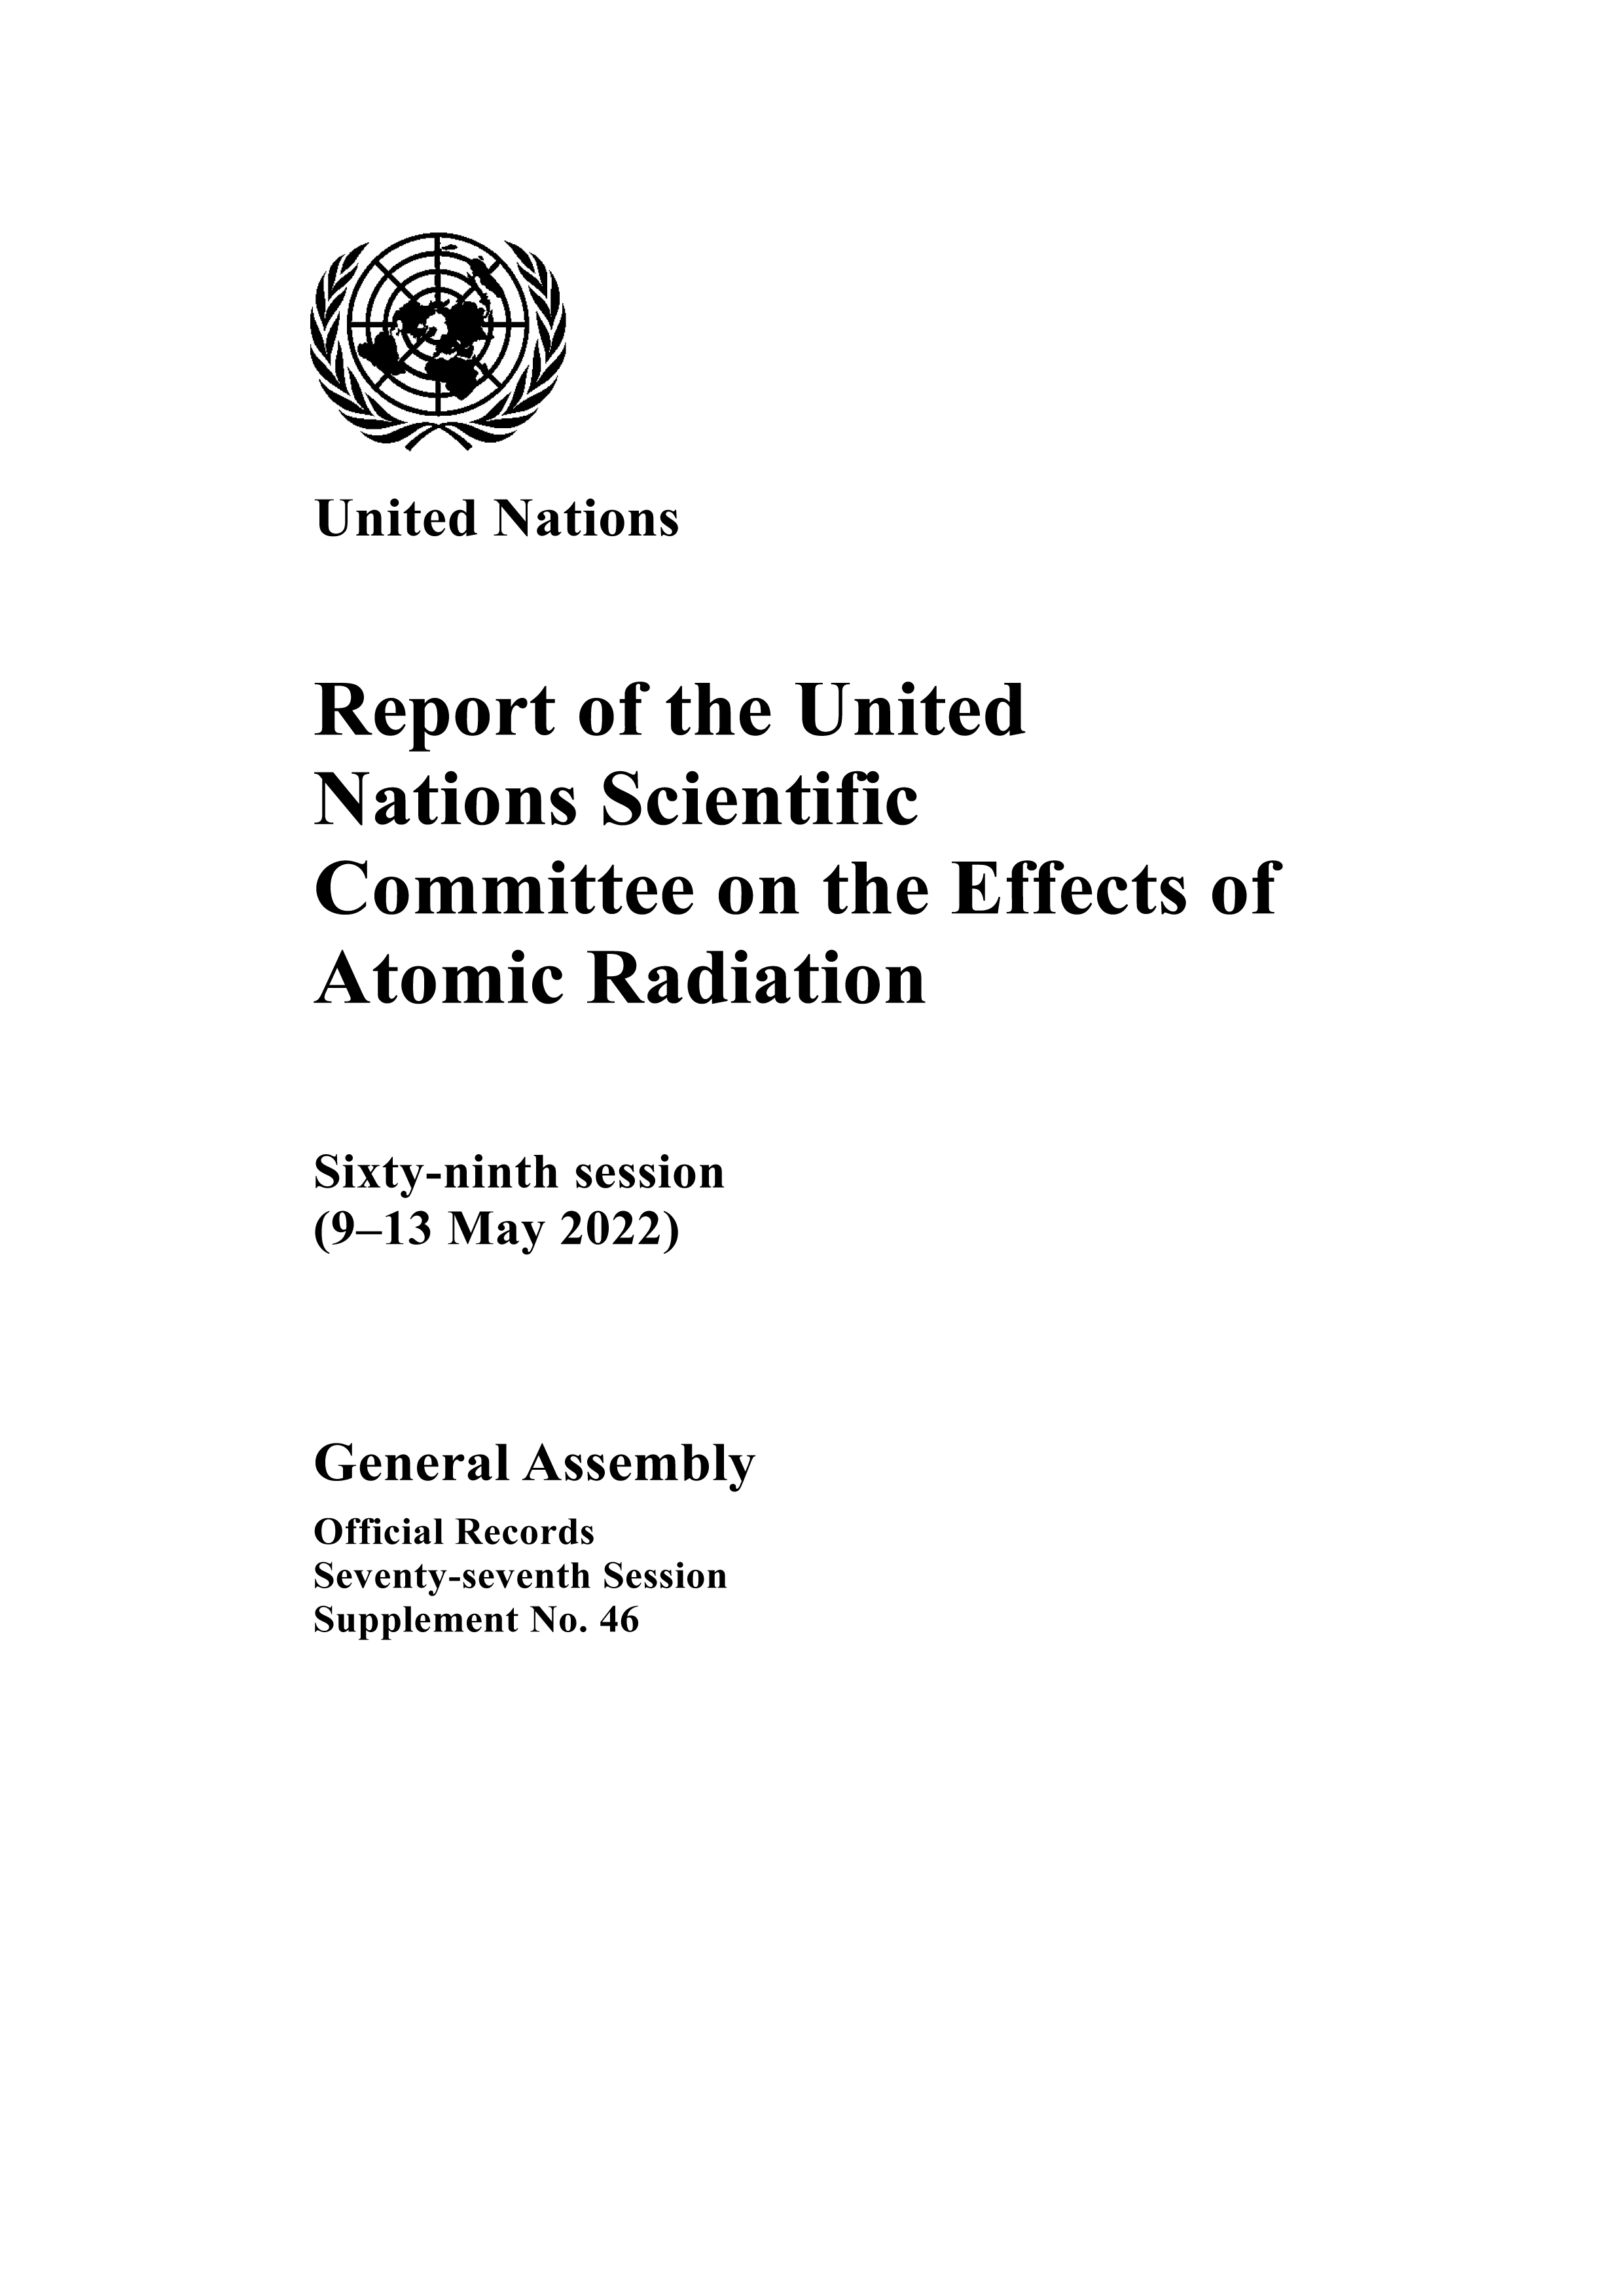 image of Report of the United Nations Scientific Committee on the Effects of Atomic Radiation (UNSCEAR) 2022